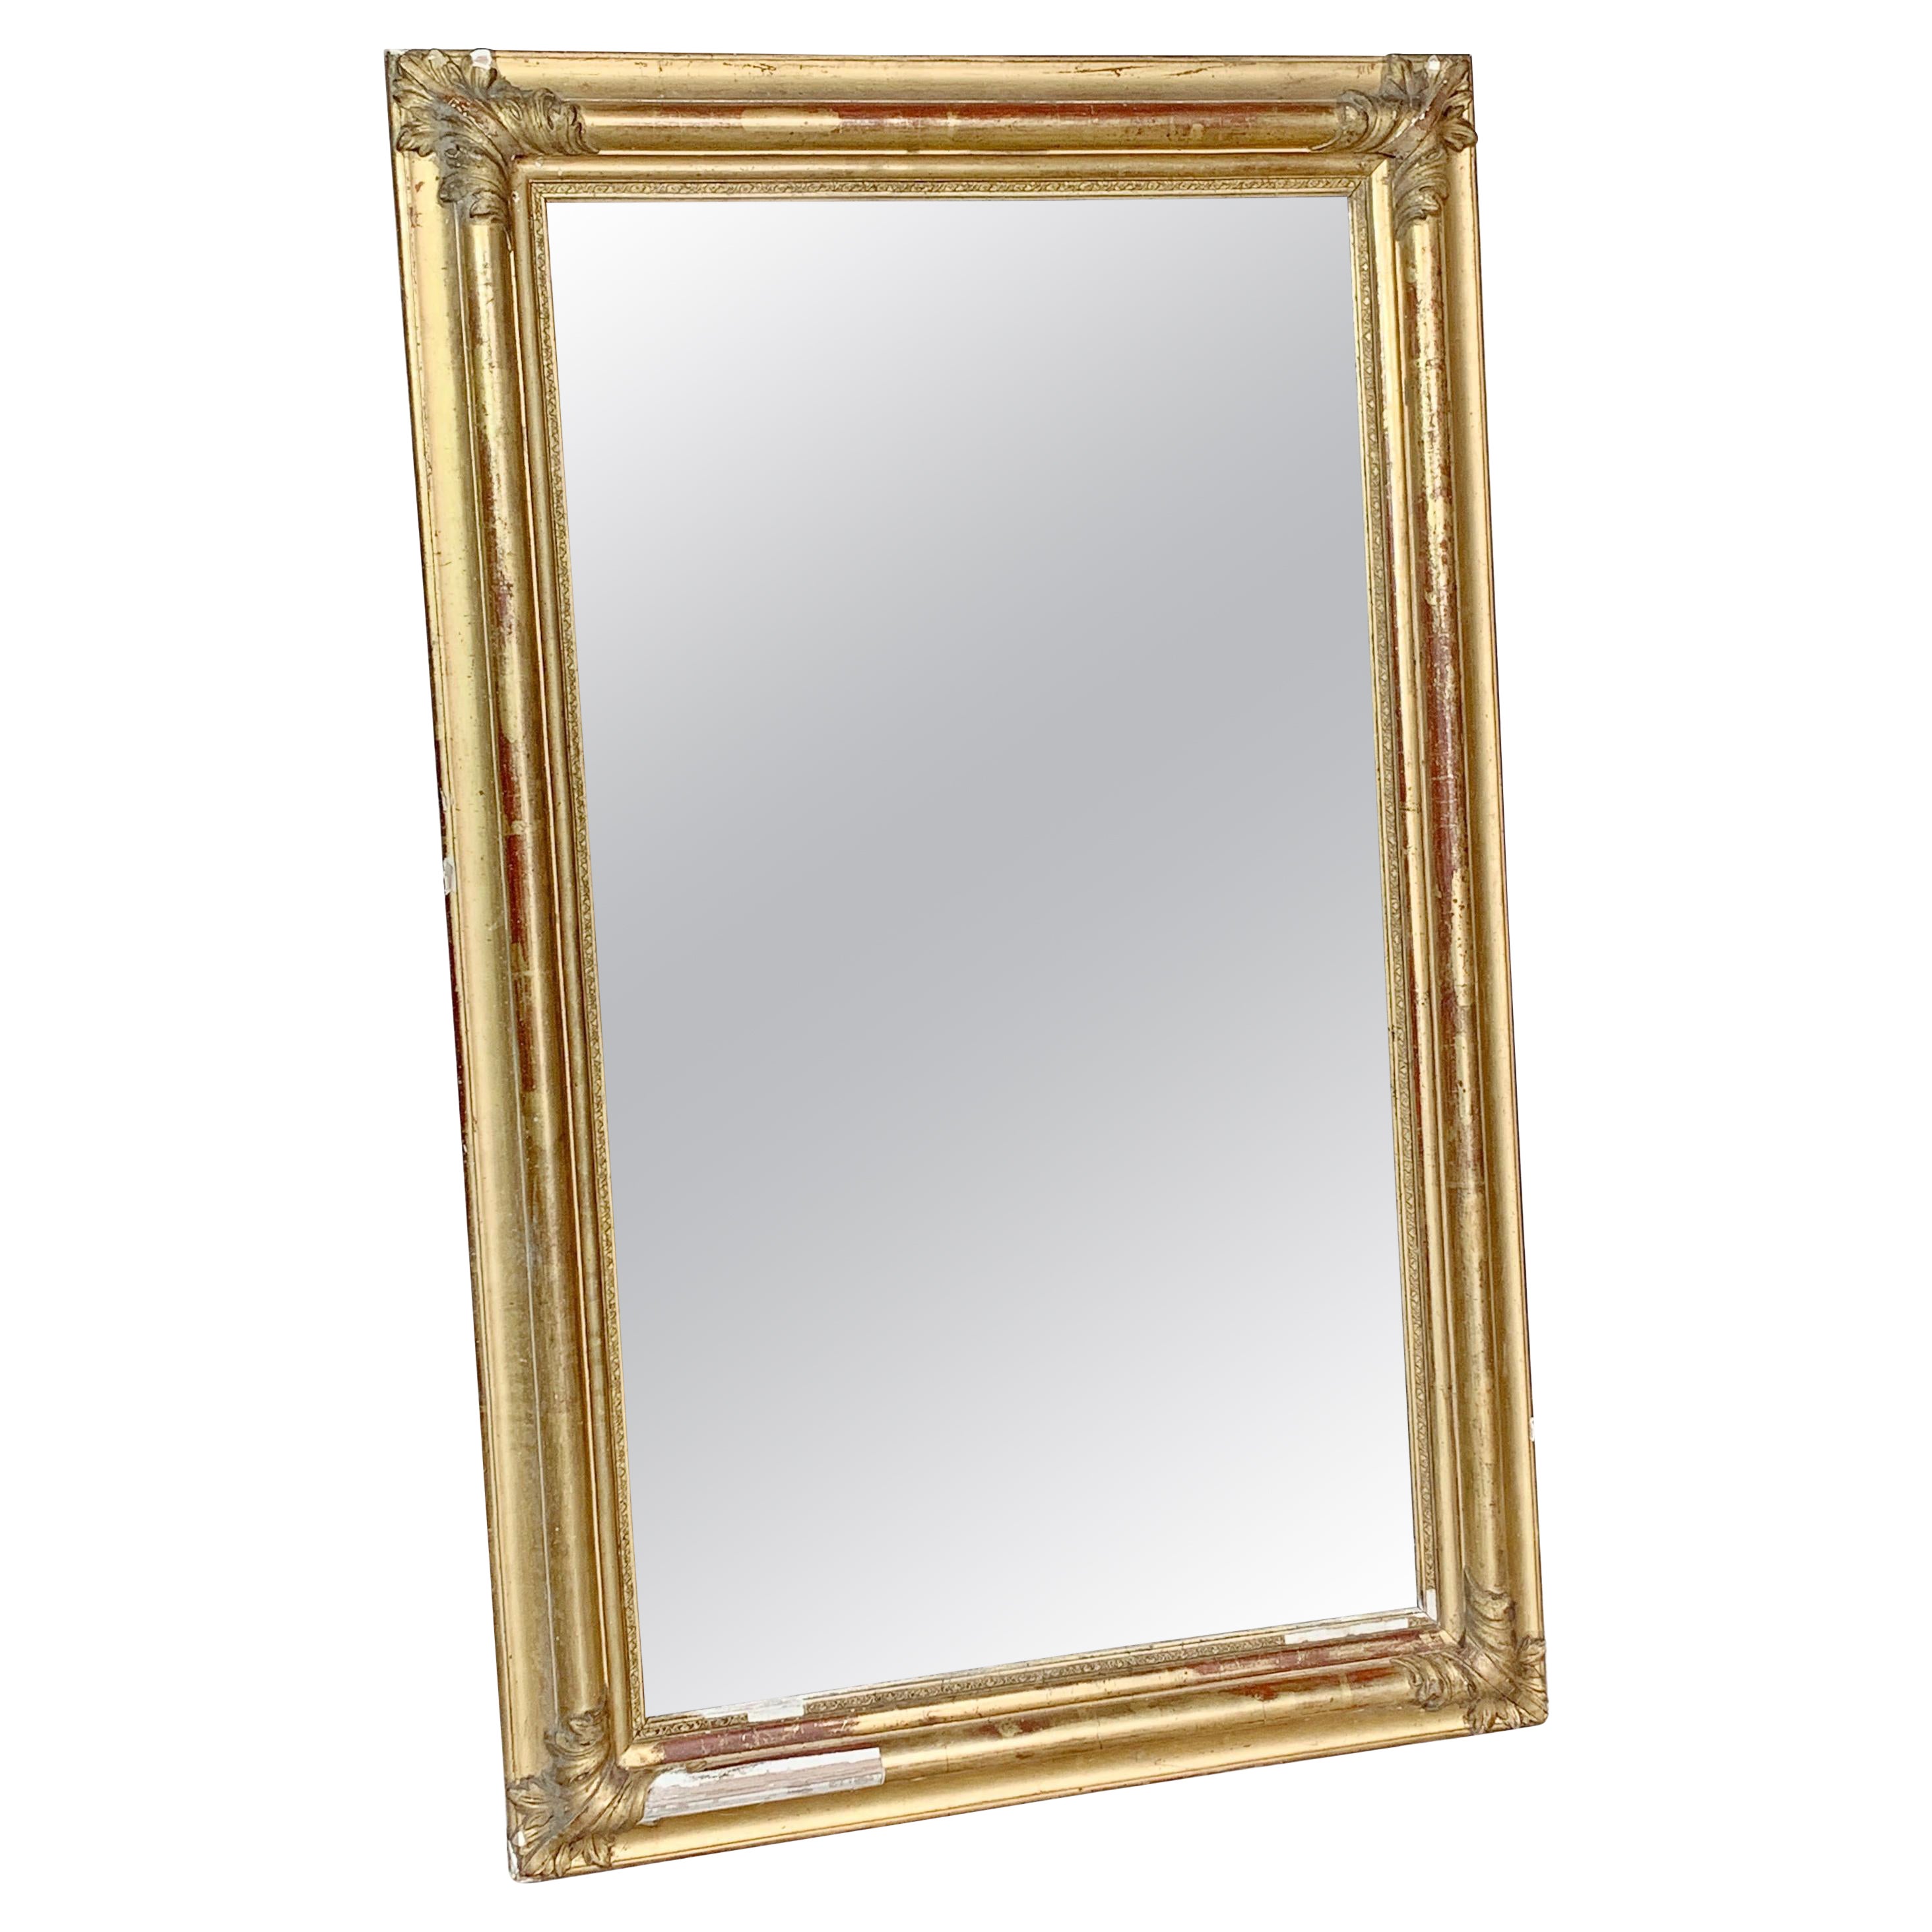 19e siècle, Antique French Gold Mirror